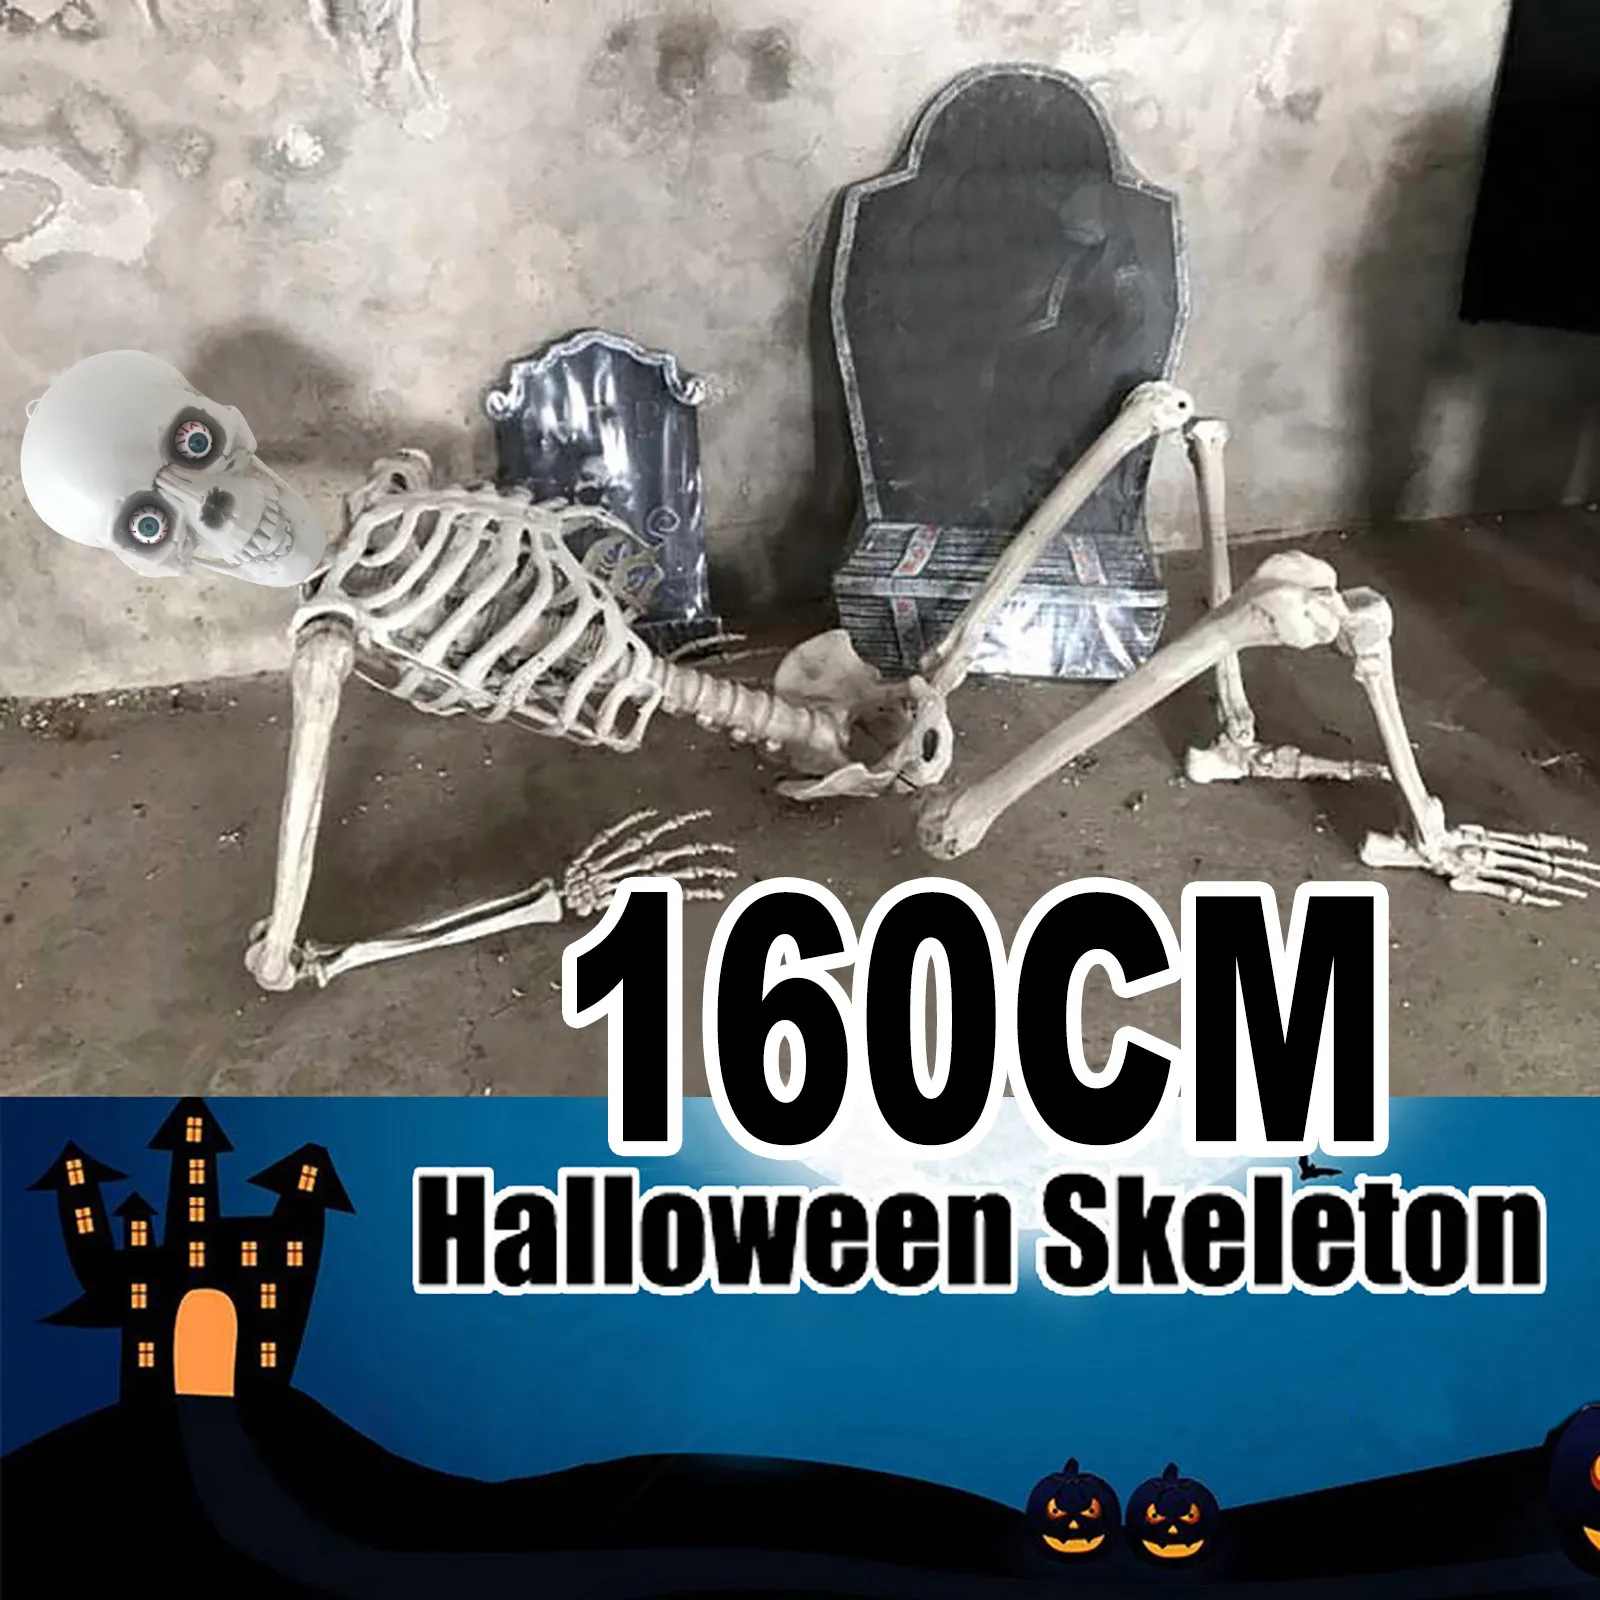 Details about   Halloween Skeleton 160cm life size Poseable Human Perfect Party Decoration giant 